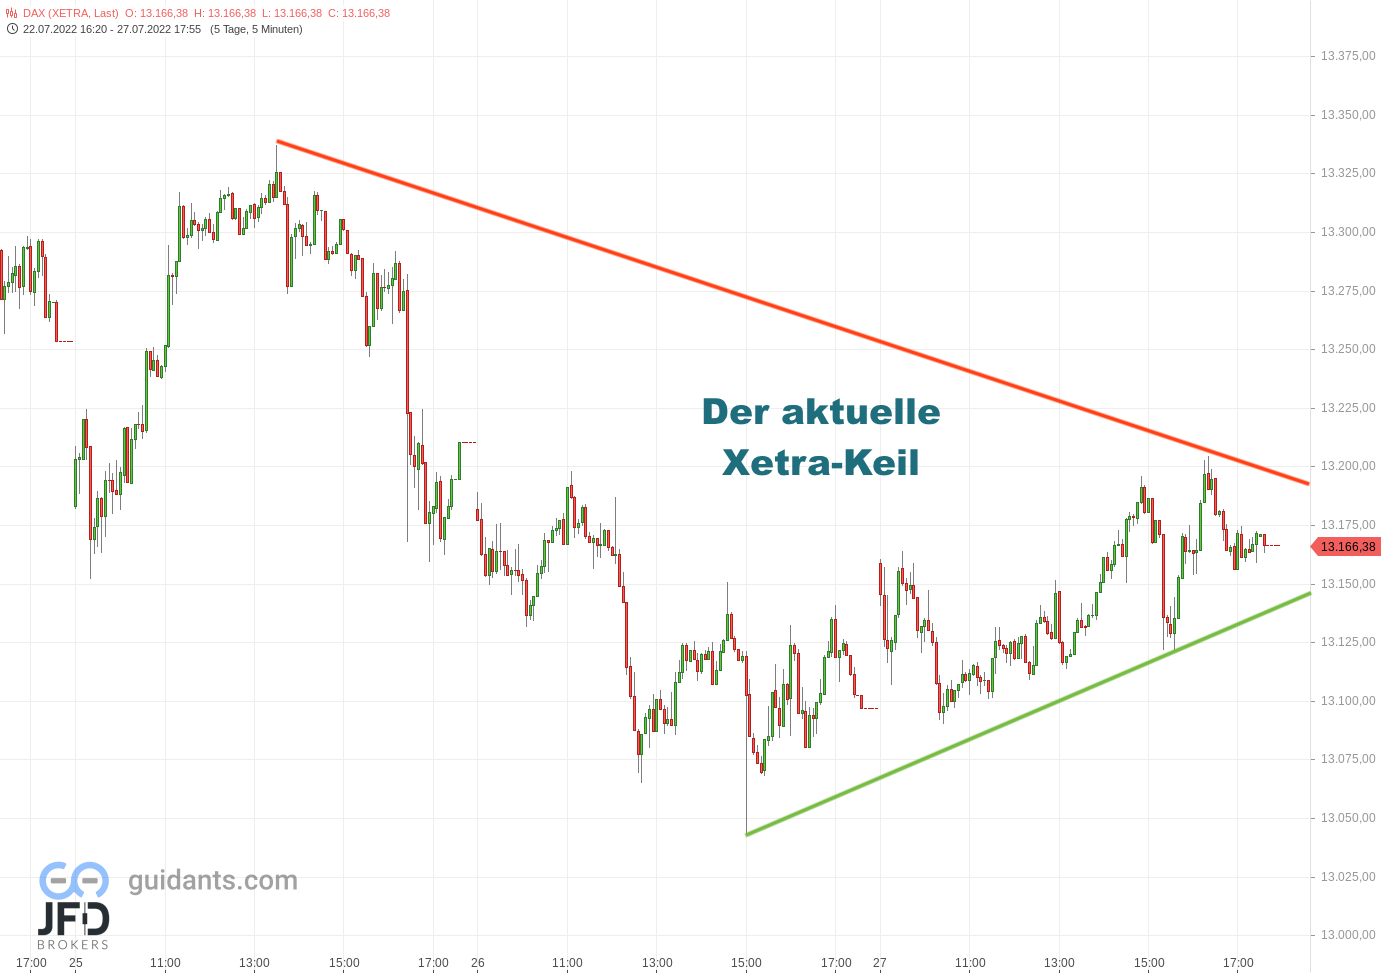 20220728 The history of the DAX Xetra